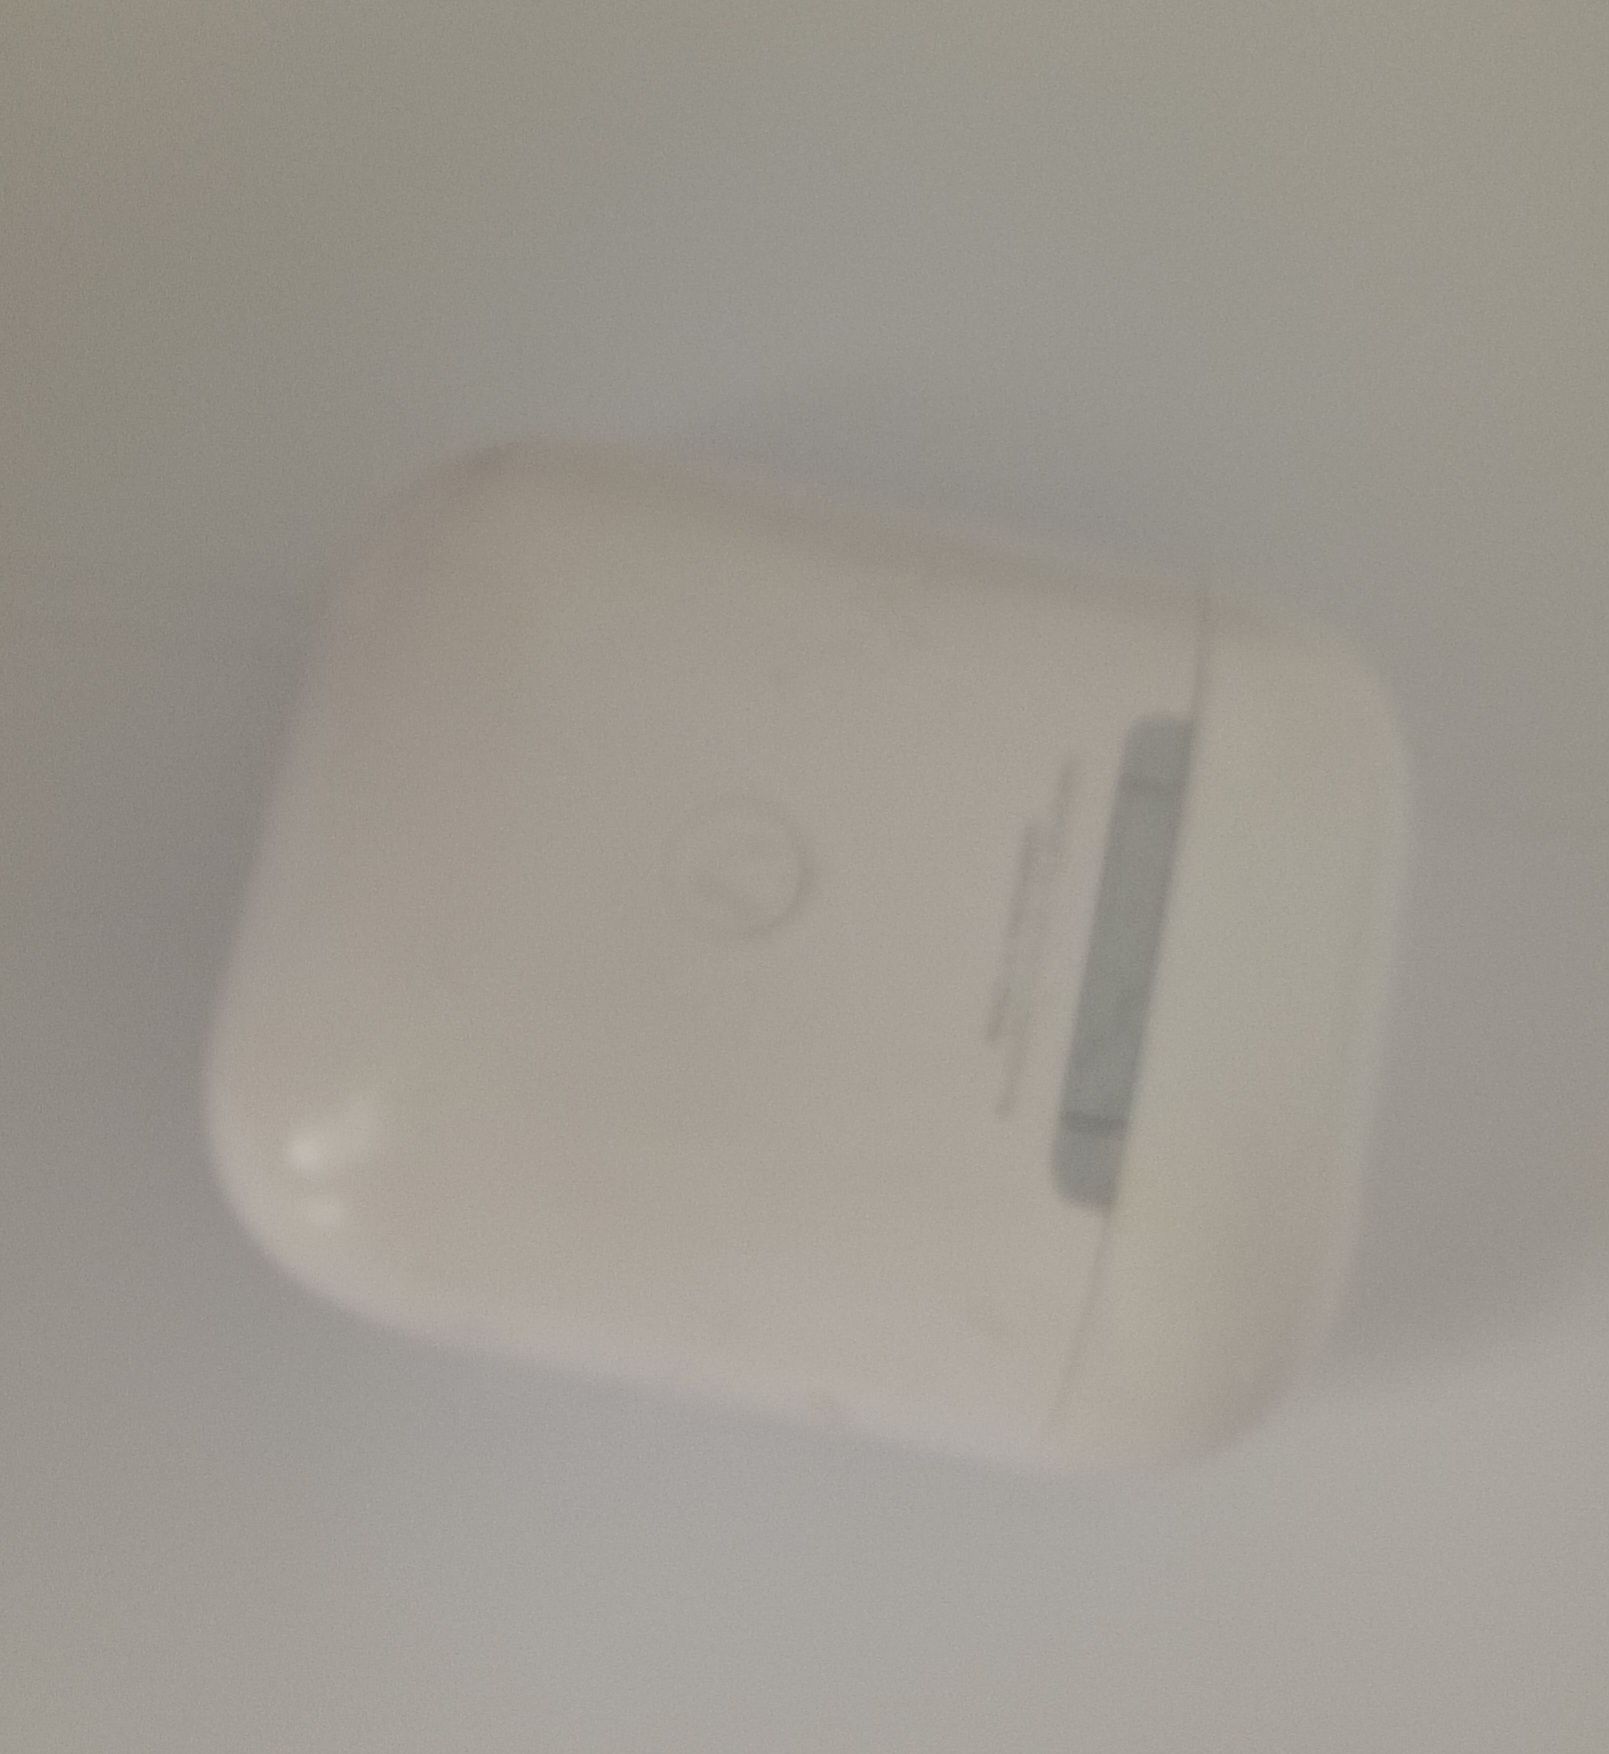 Apple  airpods with case